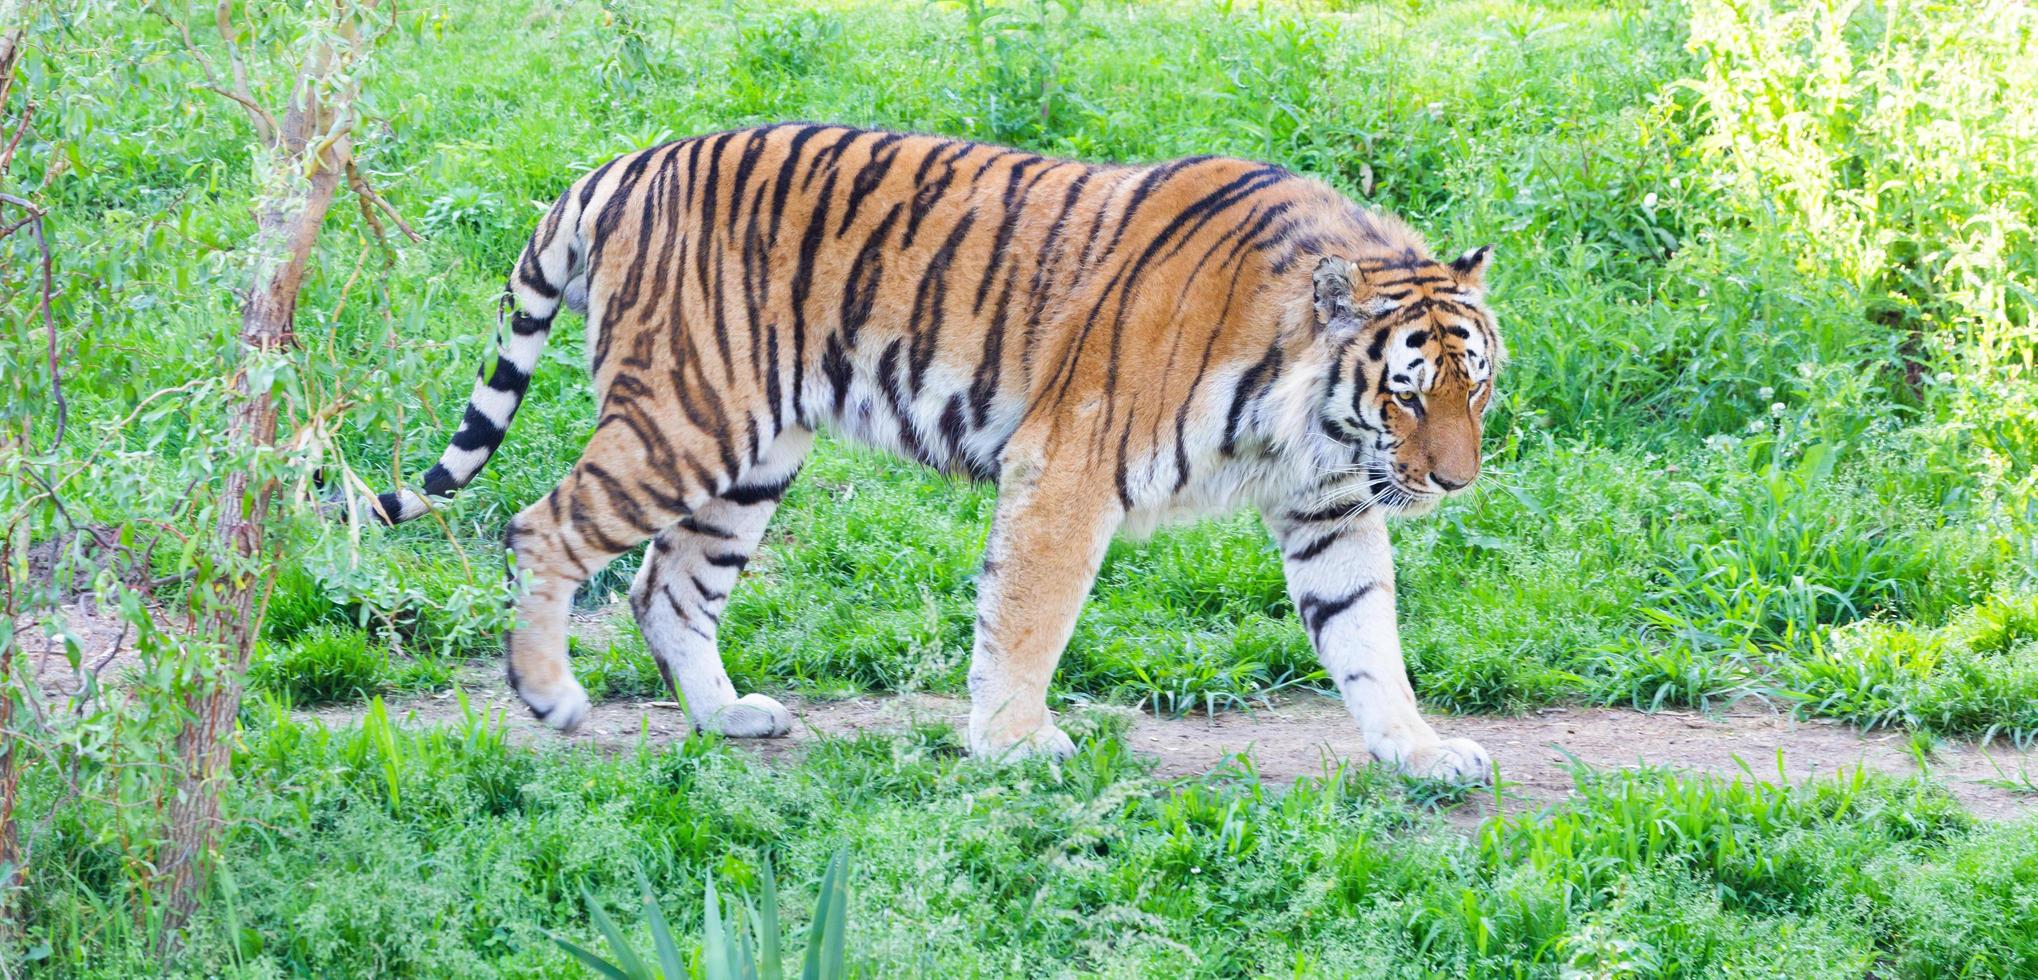 Tiger in a wildlife zoo - one of the biggest carnivore in nature. photo